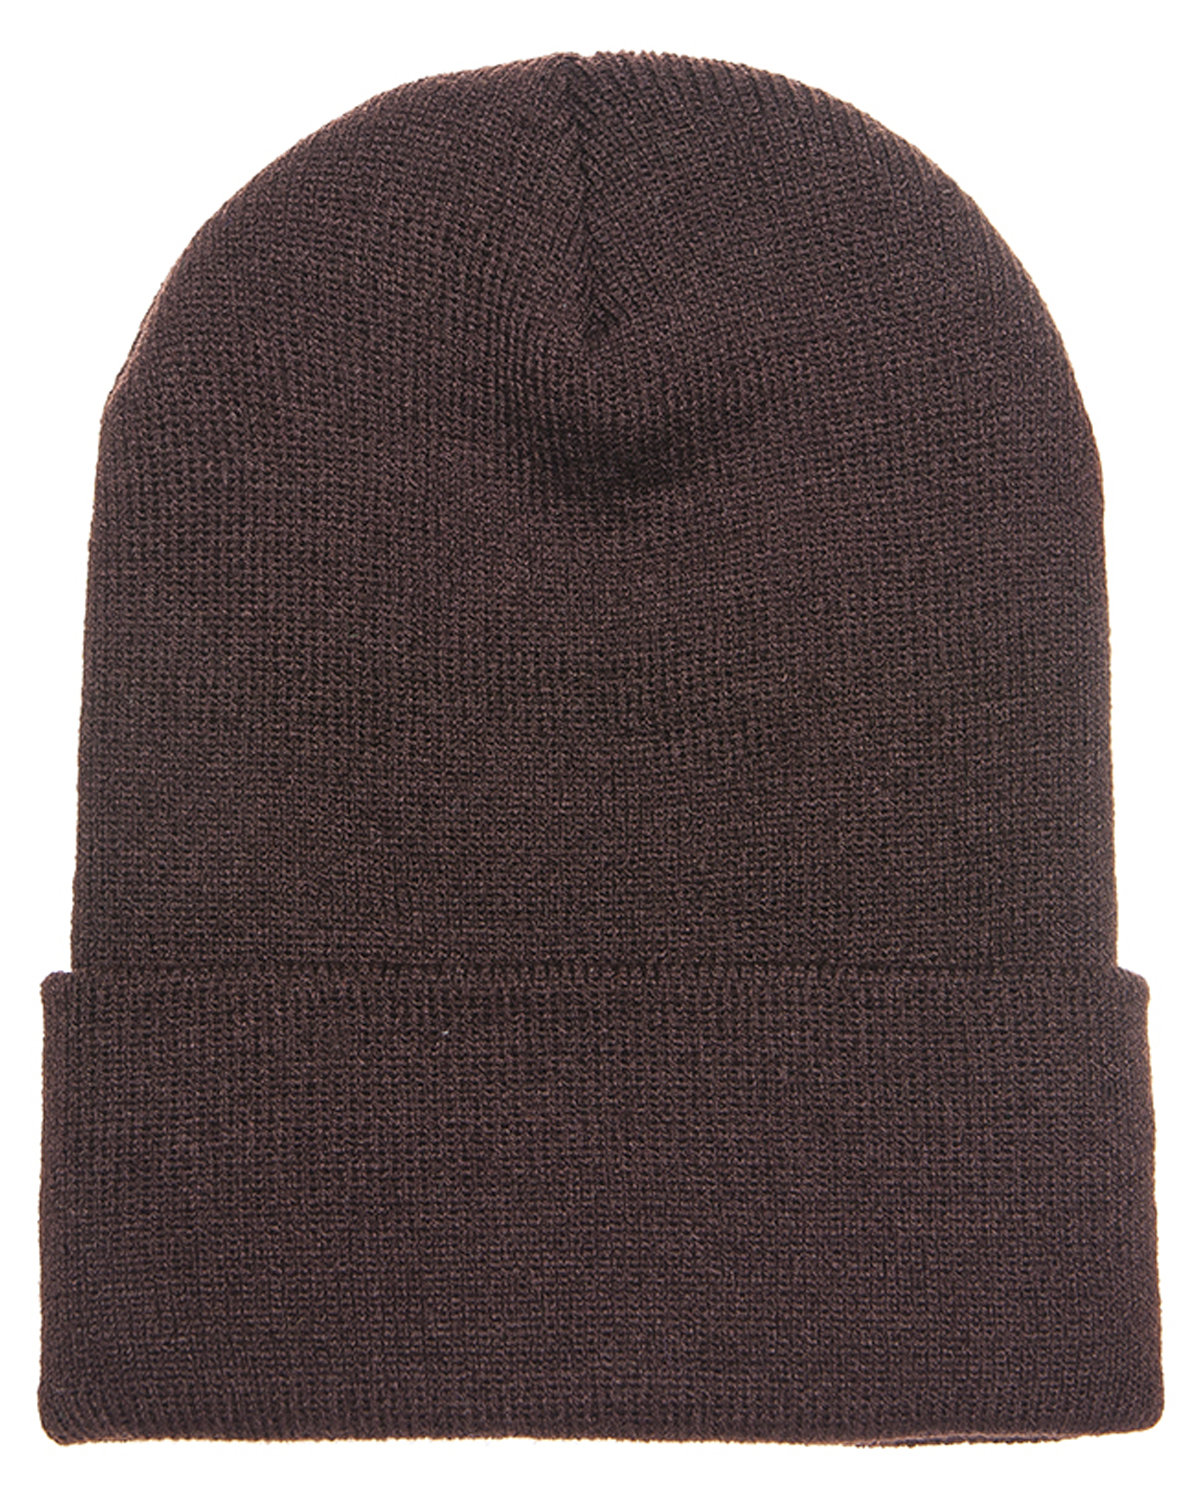 Yupoong Adult Cuffed alphabroder Beanie | Knit